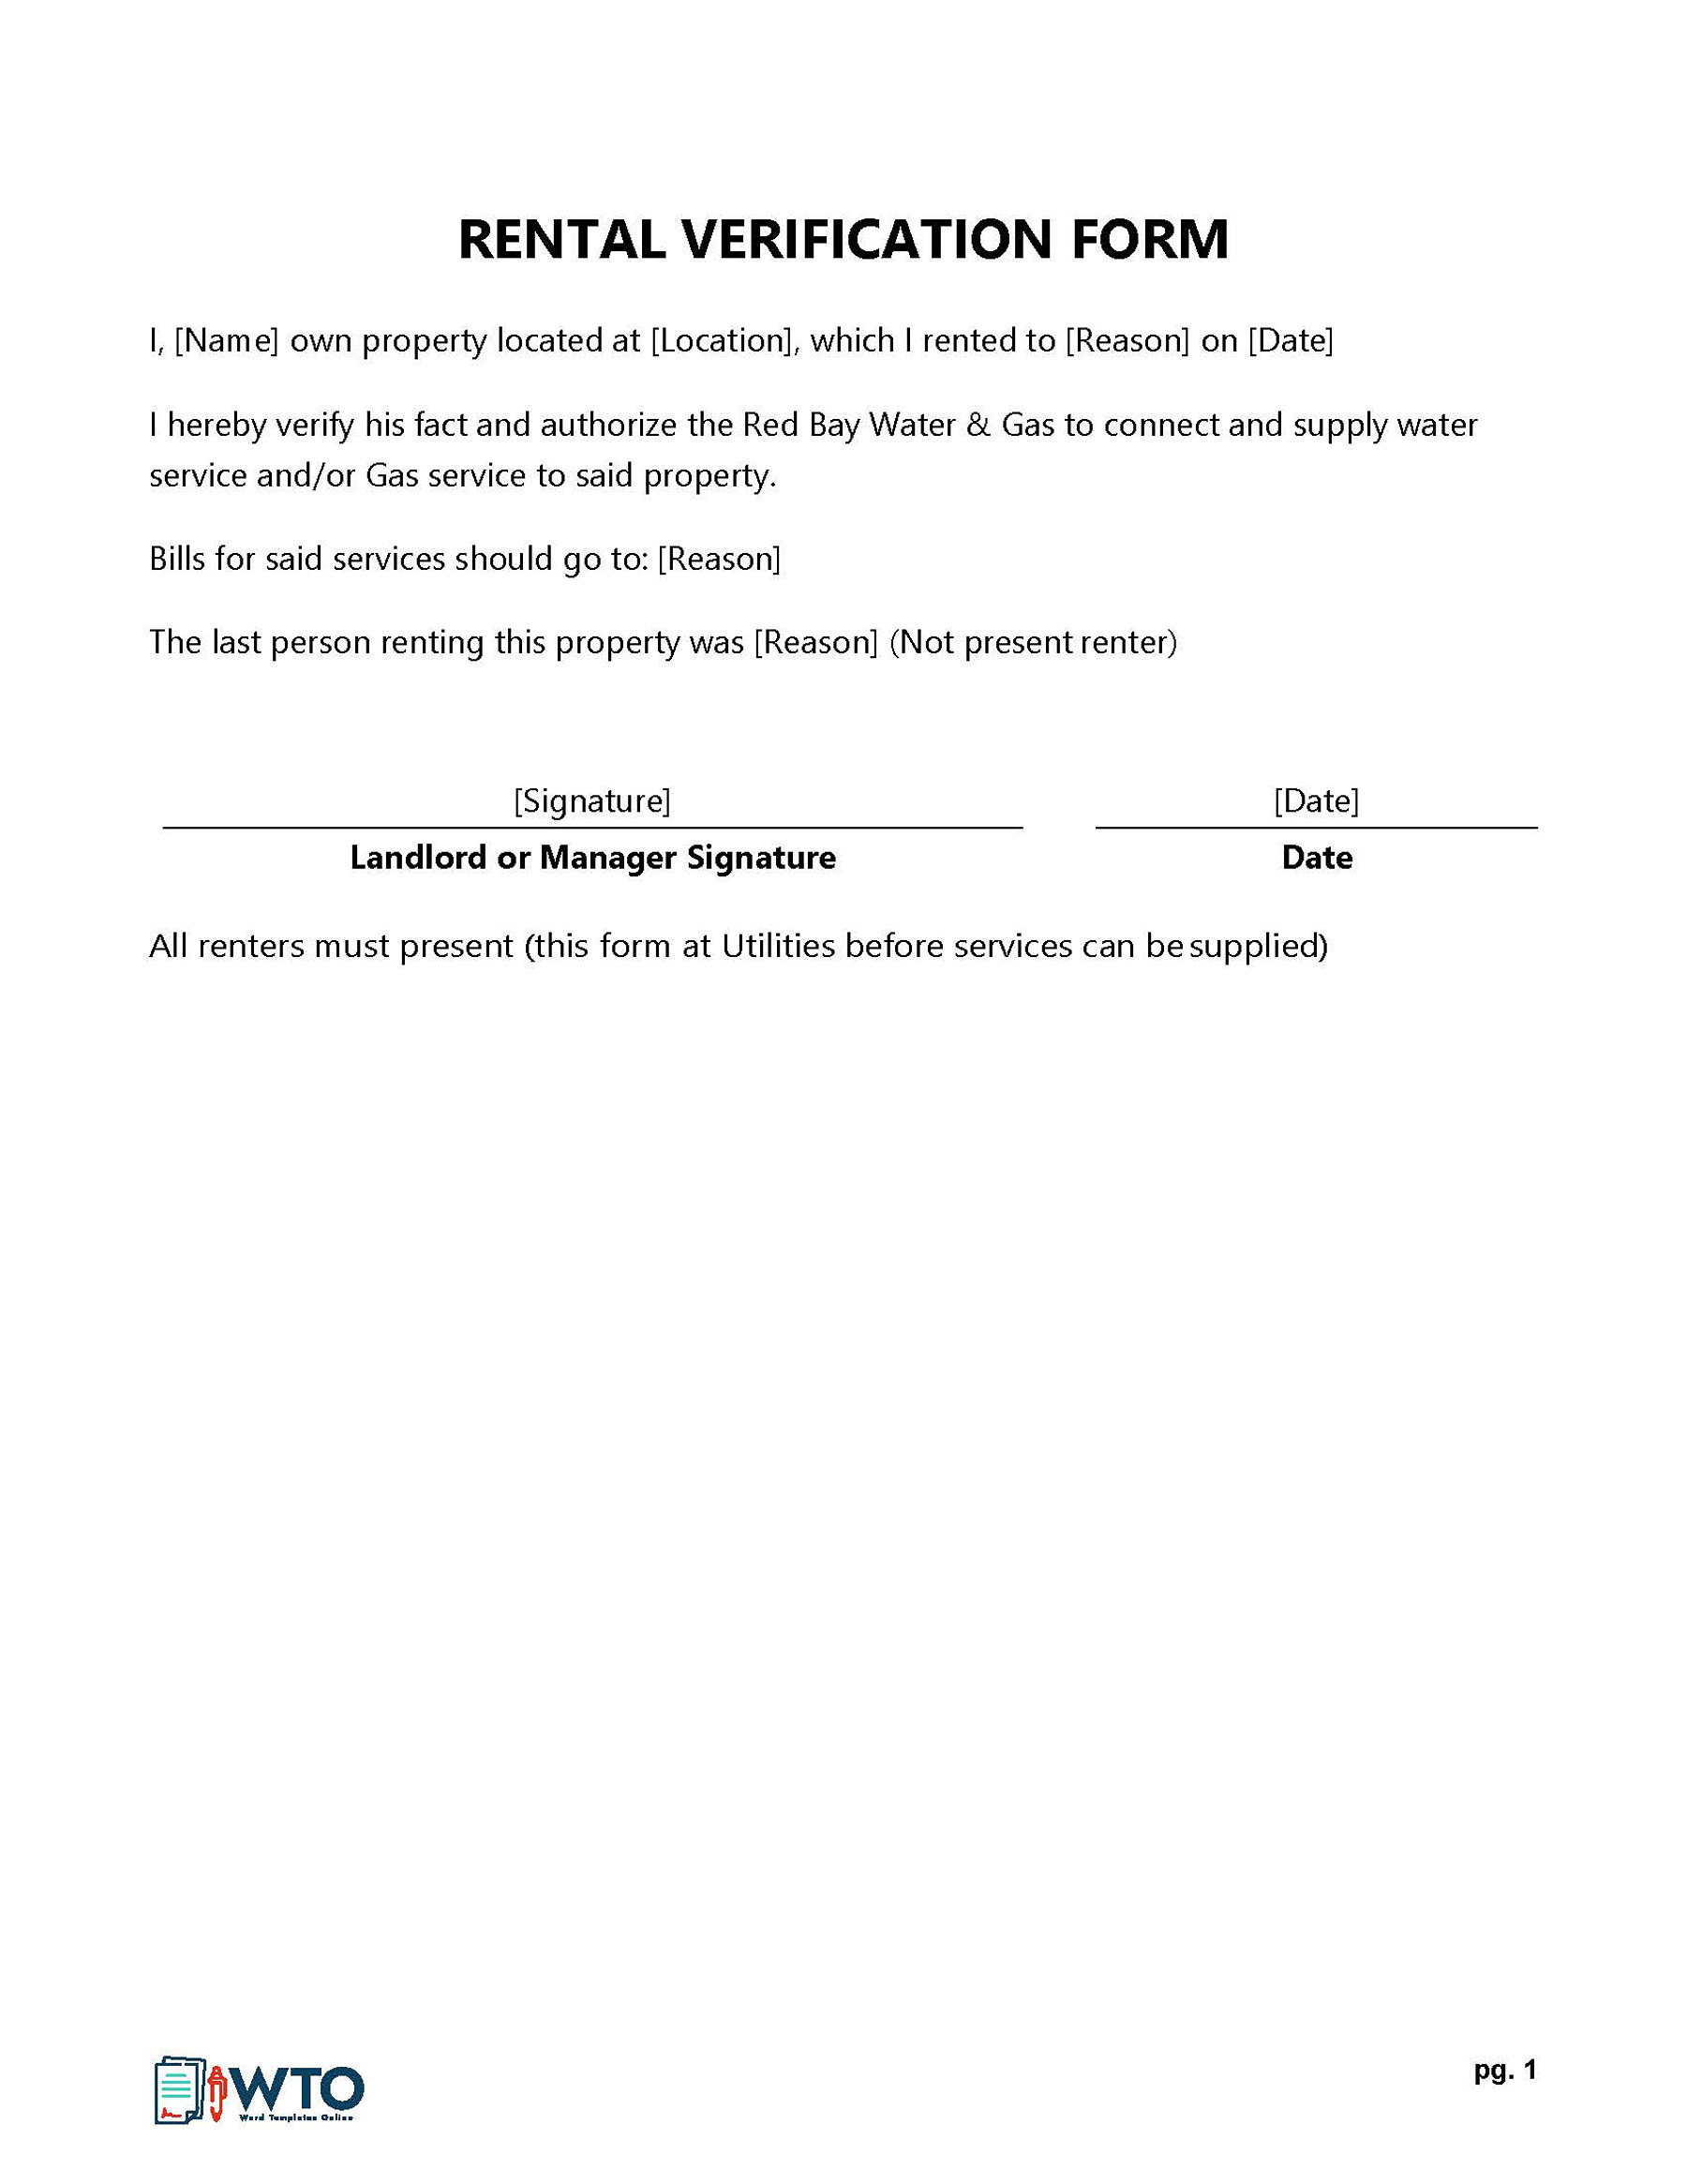 Rental Verification Form - Ready-to-Use Format